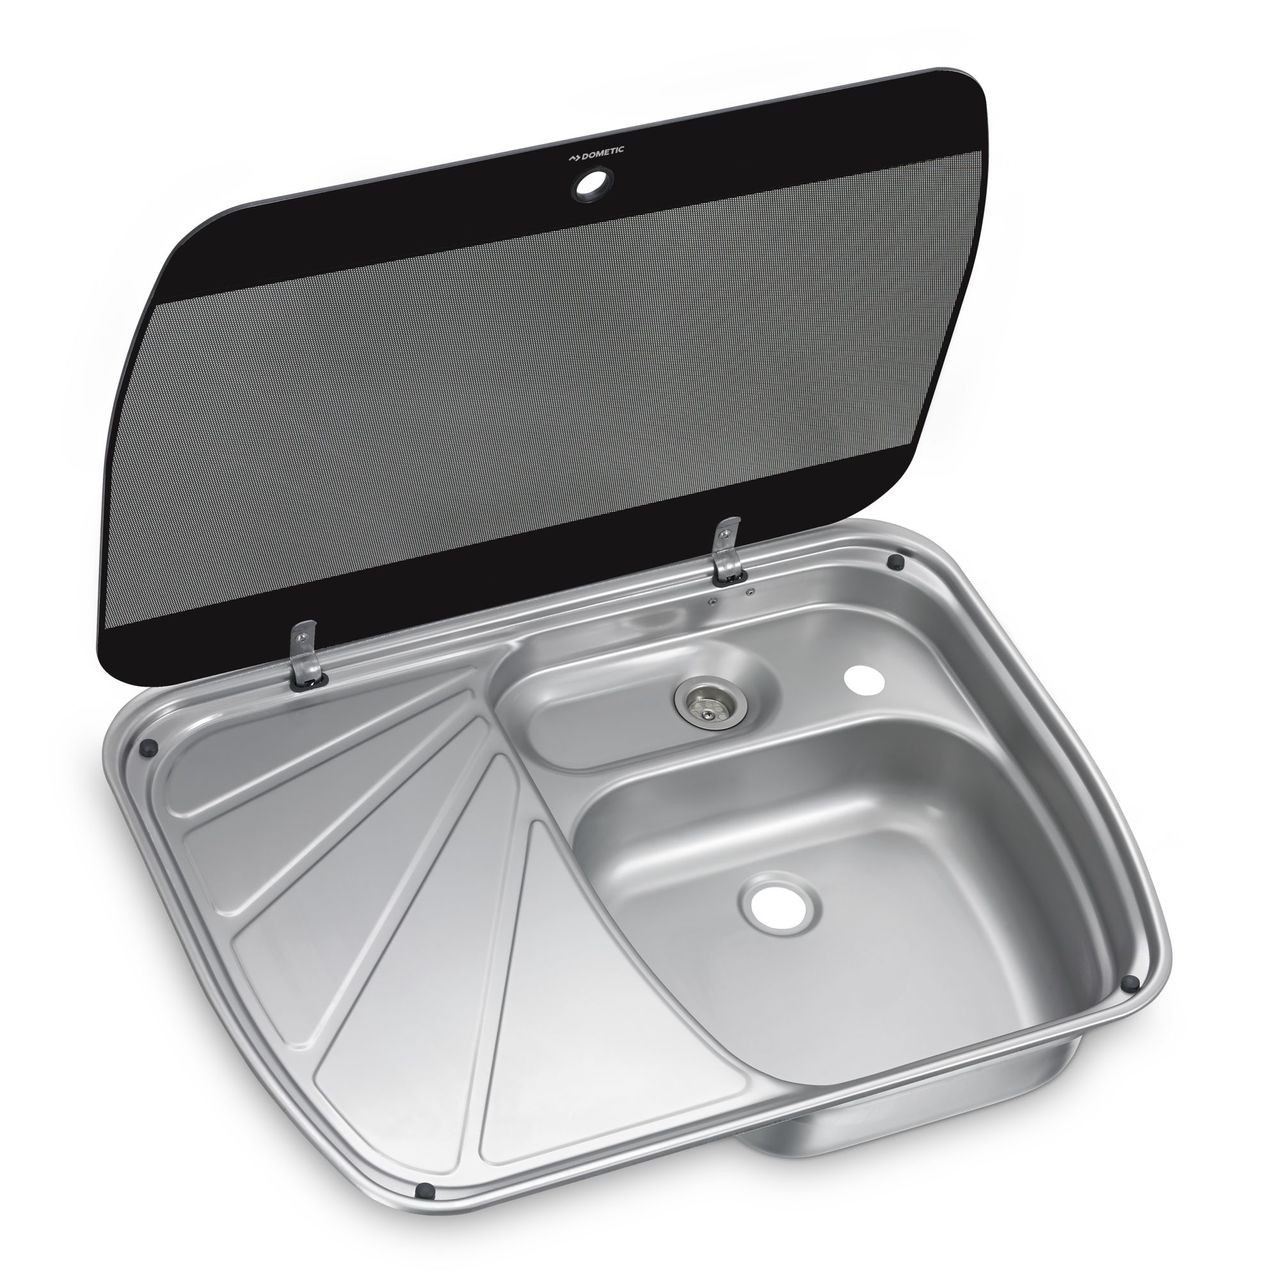 Dometic Sng 6044 Stainless Steel Caravan Sink With Drainer